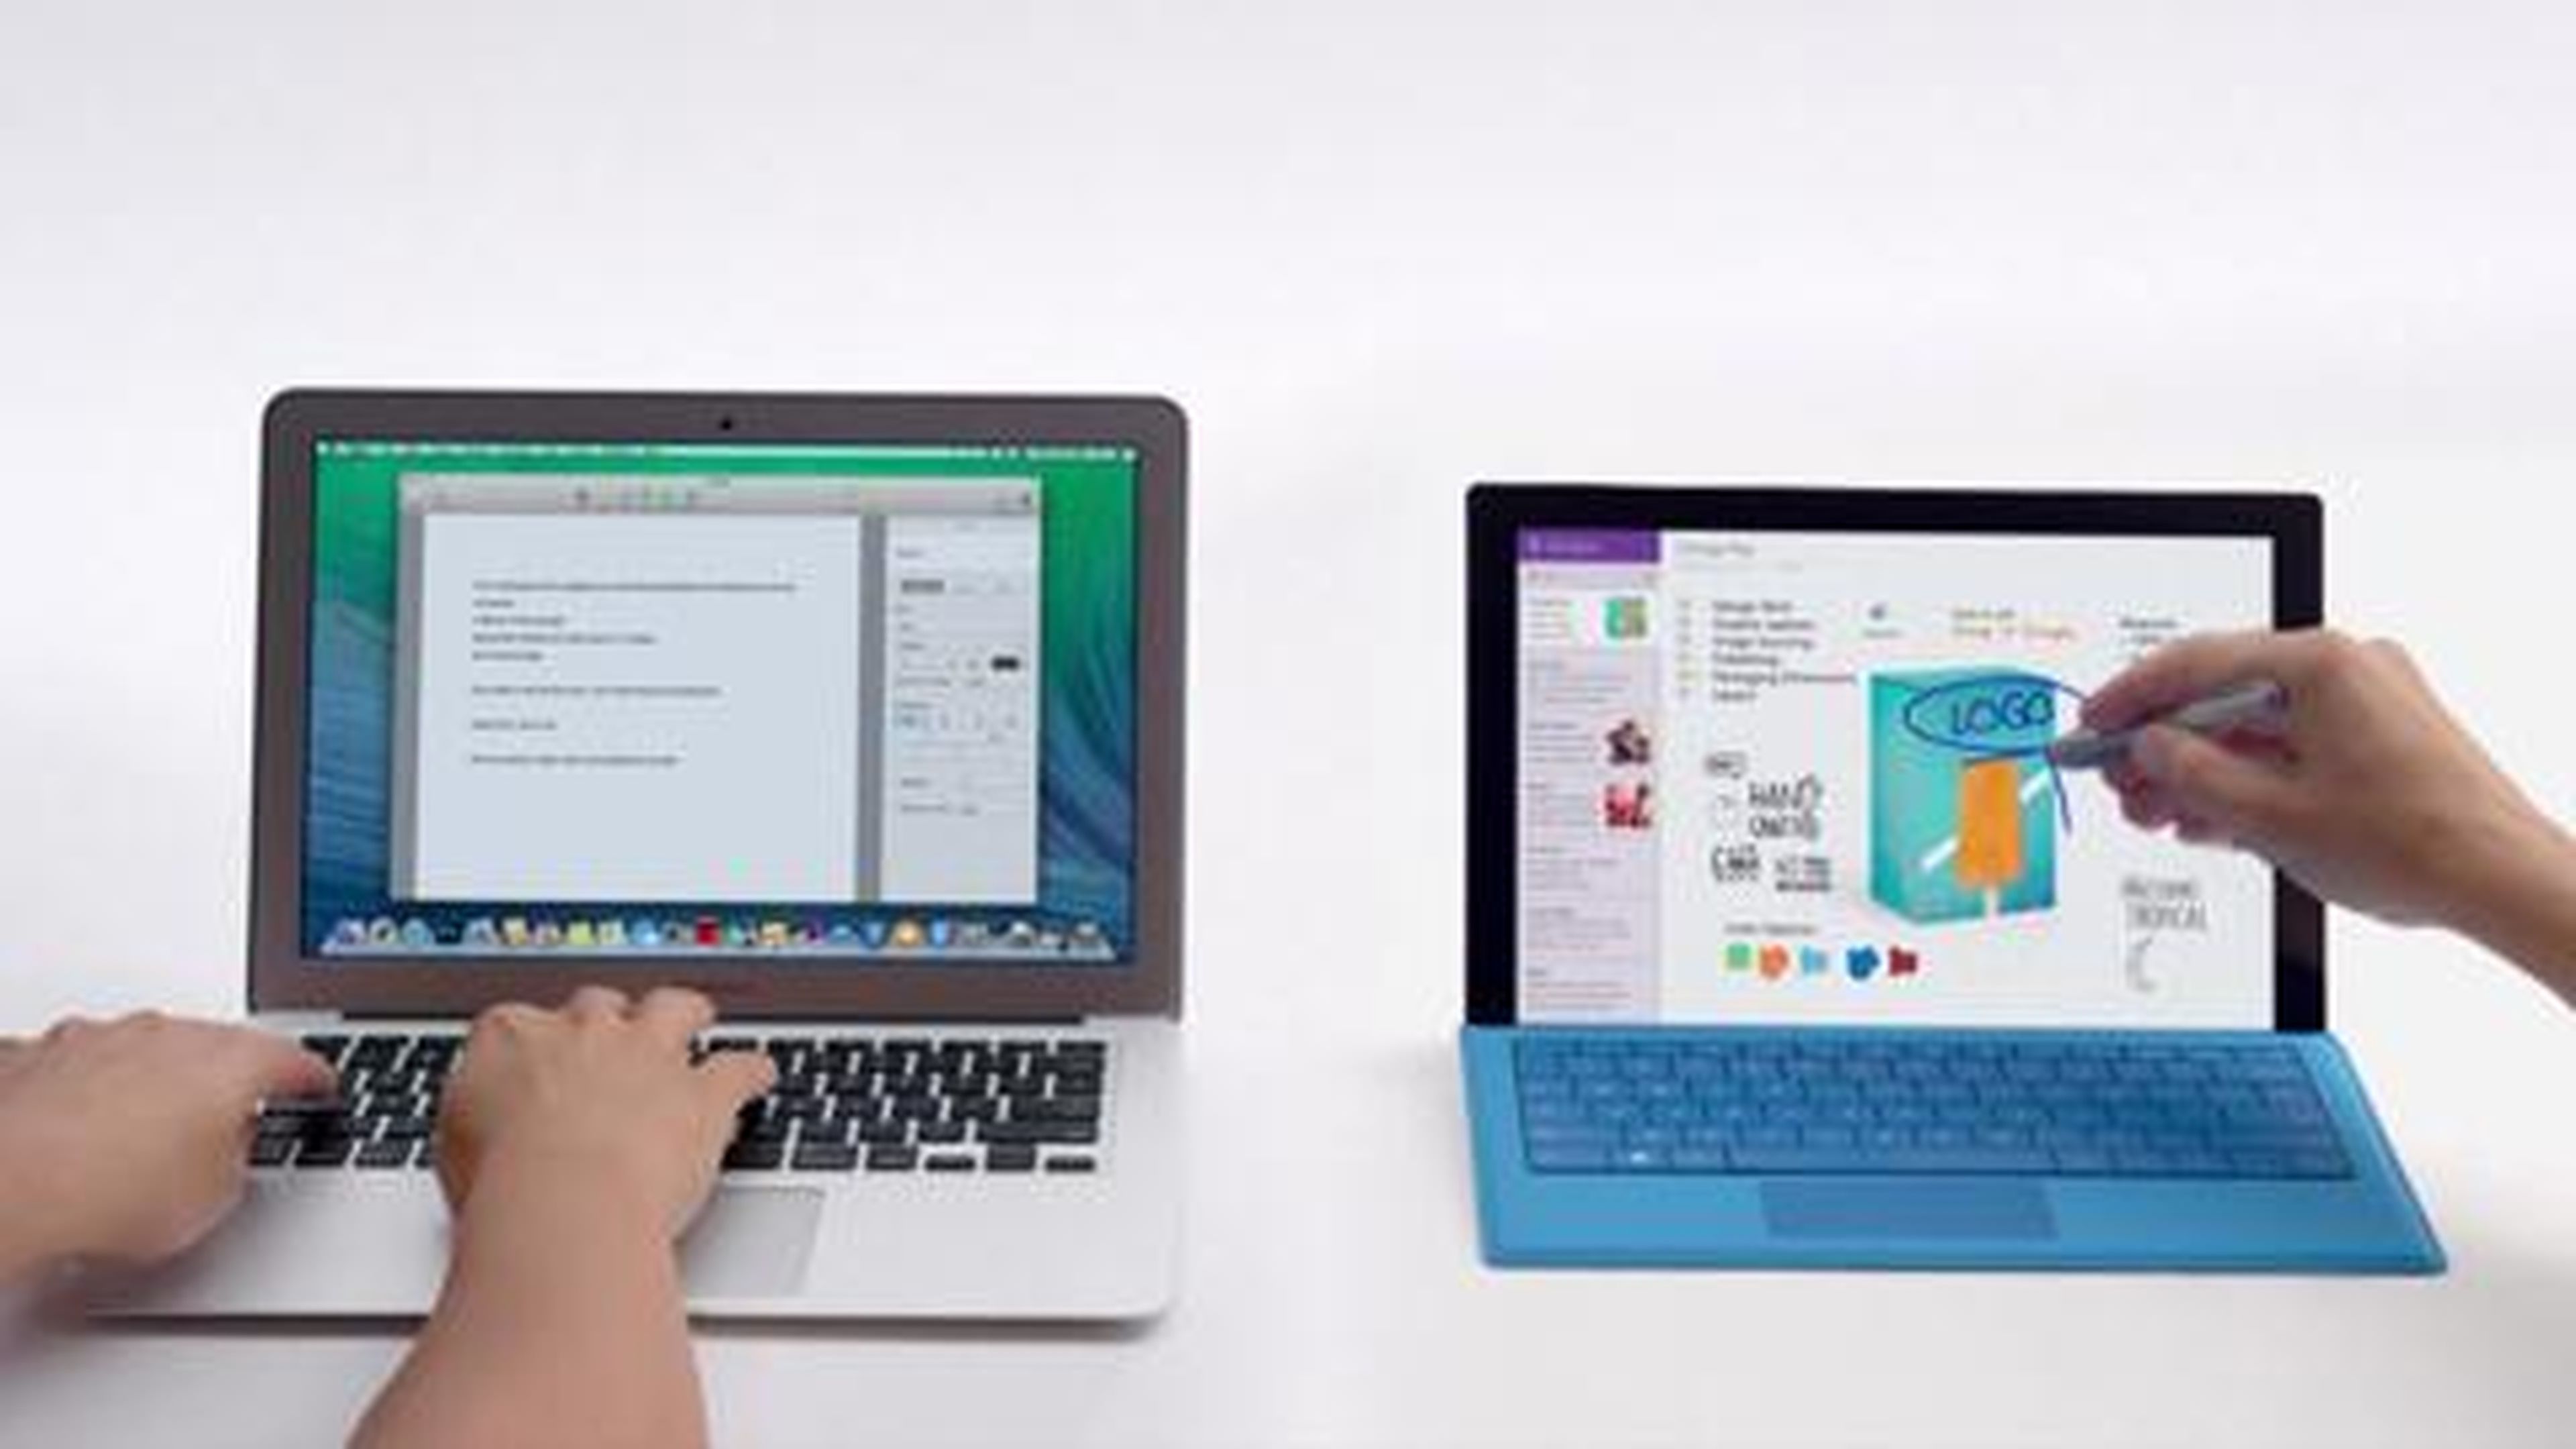 Surface Pro 3 – Power